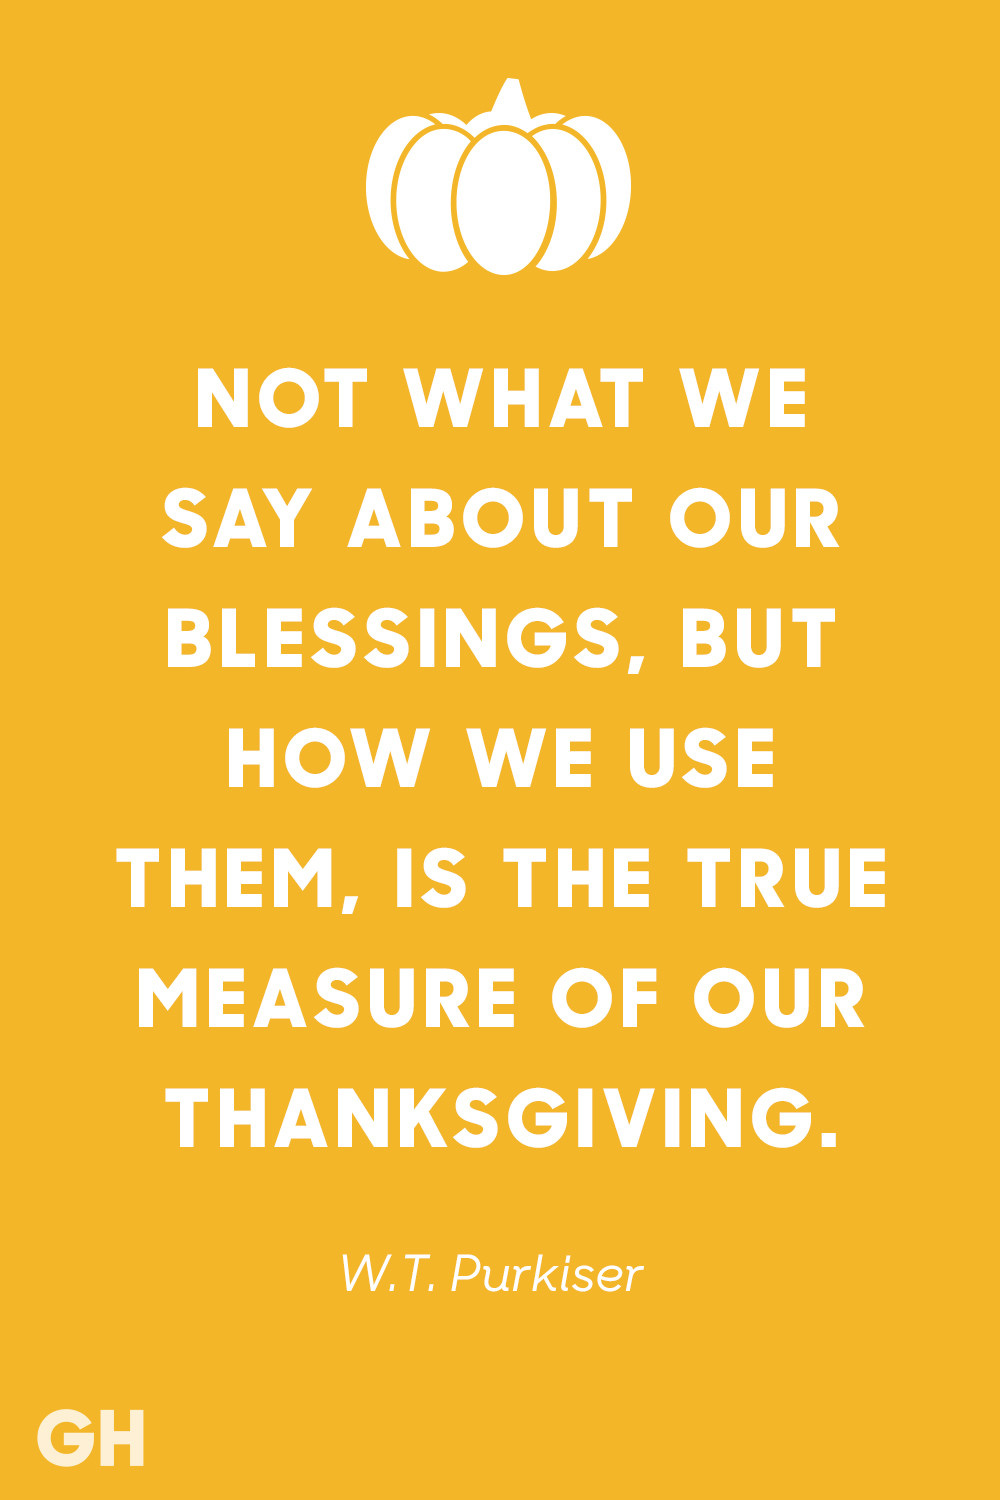 Thanksgiving Quote
 15 Best Thanksgiving Quotes Inspirational and Funny